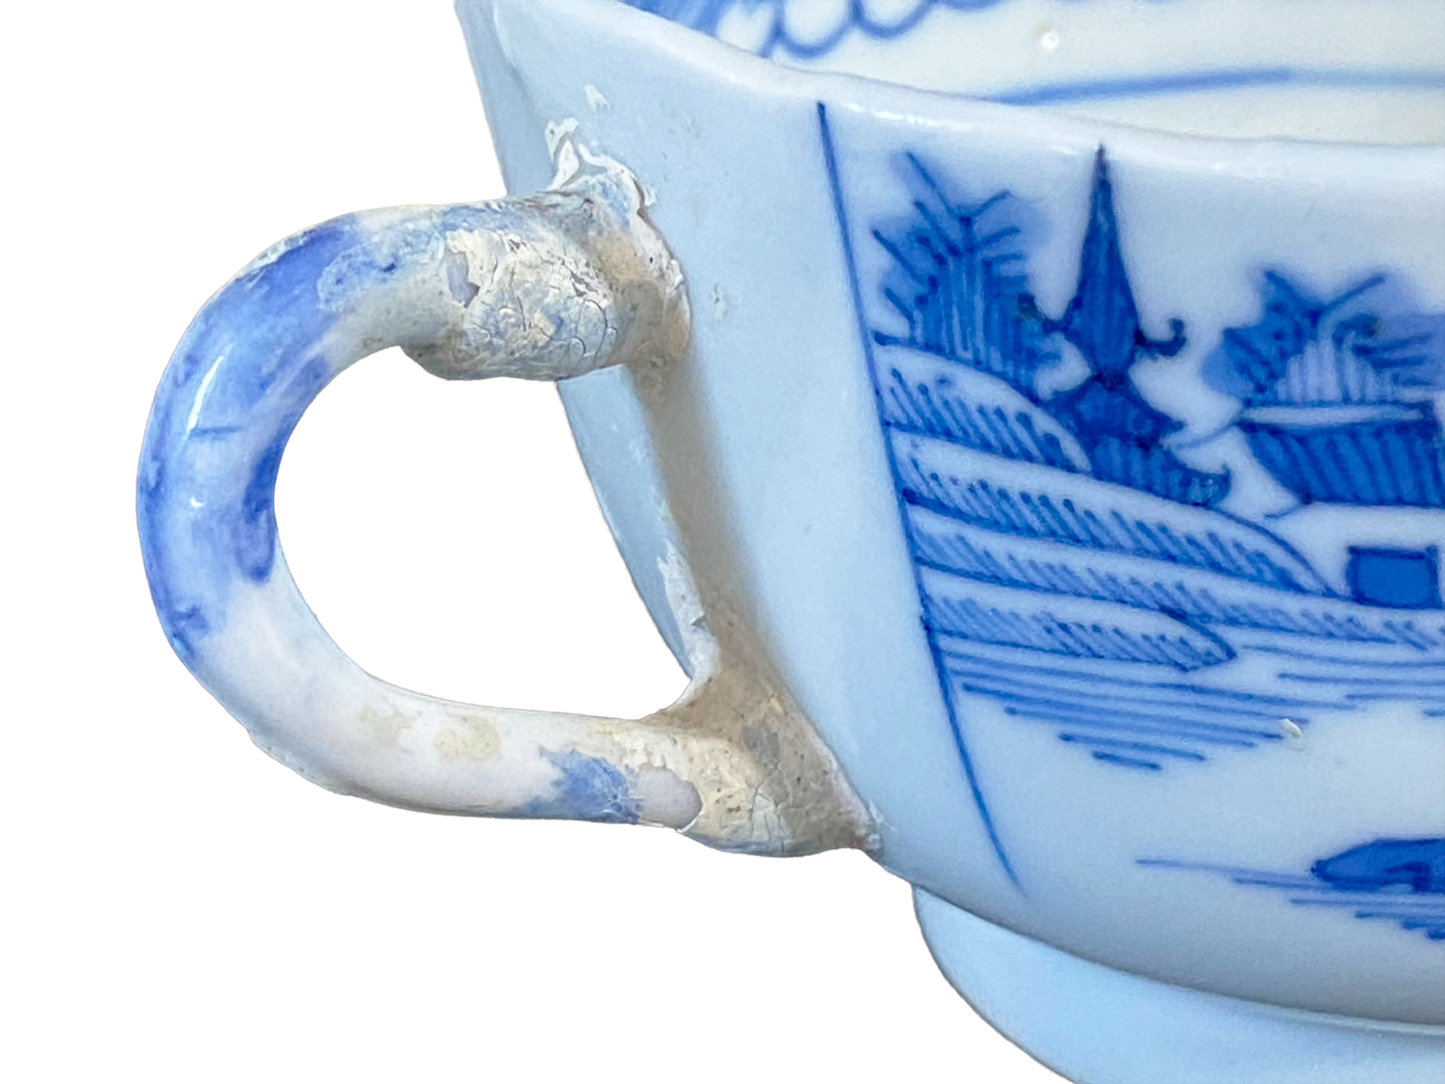 #4848 Antique Blue & White Canton Pagoda Pattern Tea Cups S/2